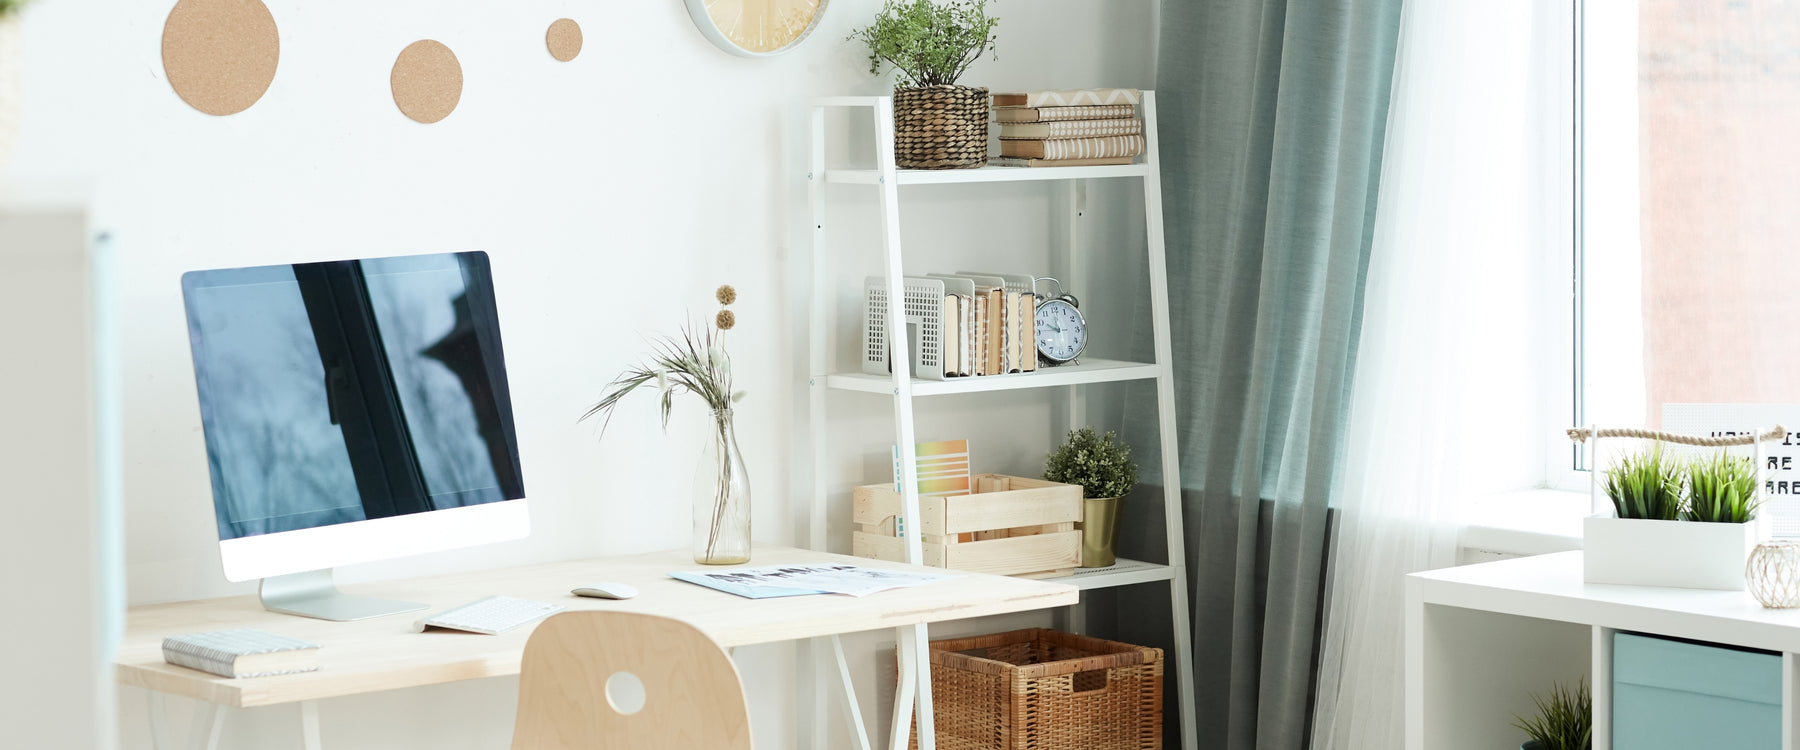 5 Inspirational Sources for Teen Room Decoration